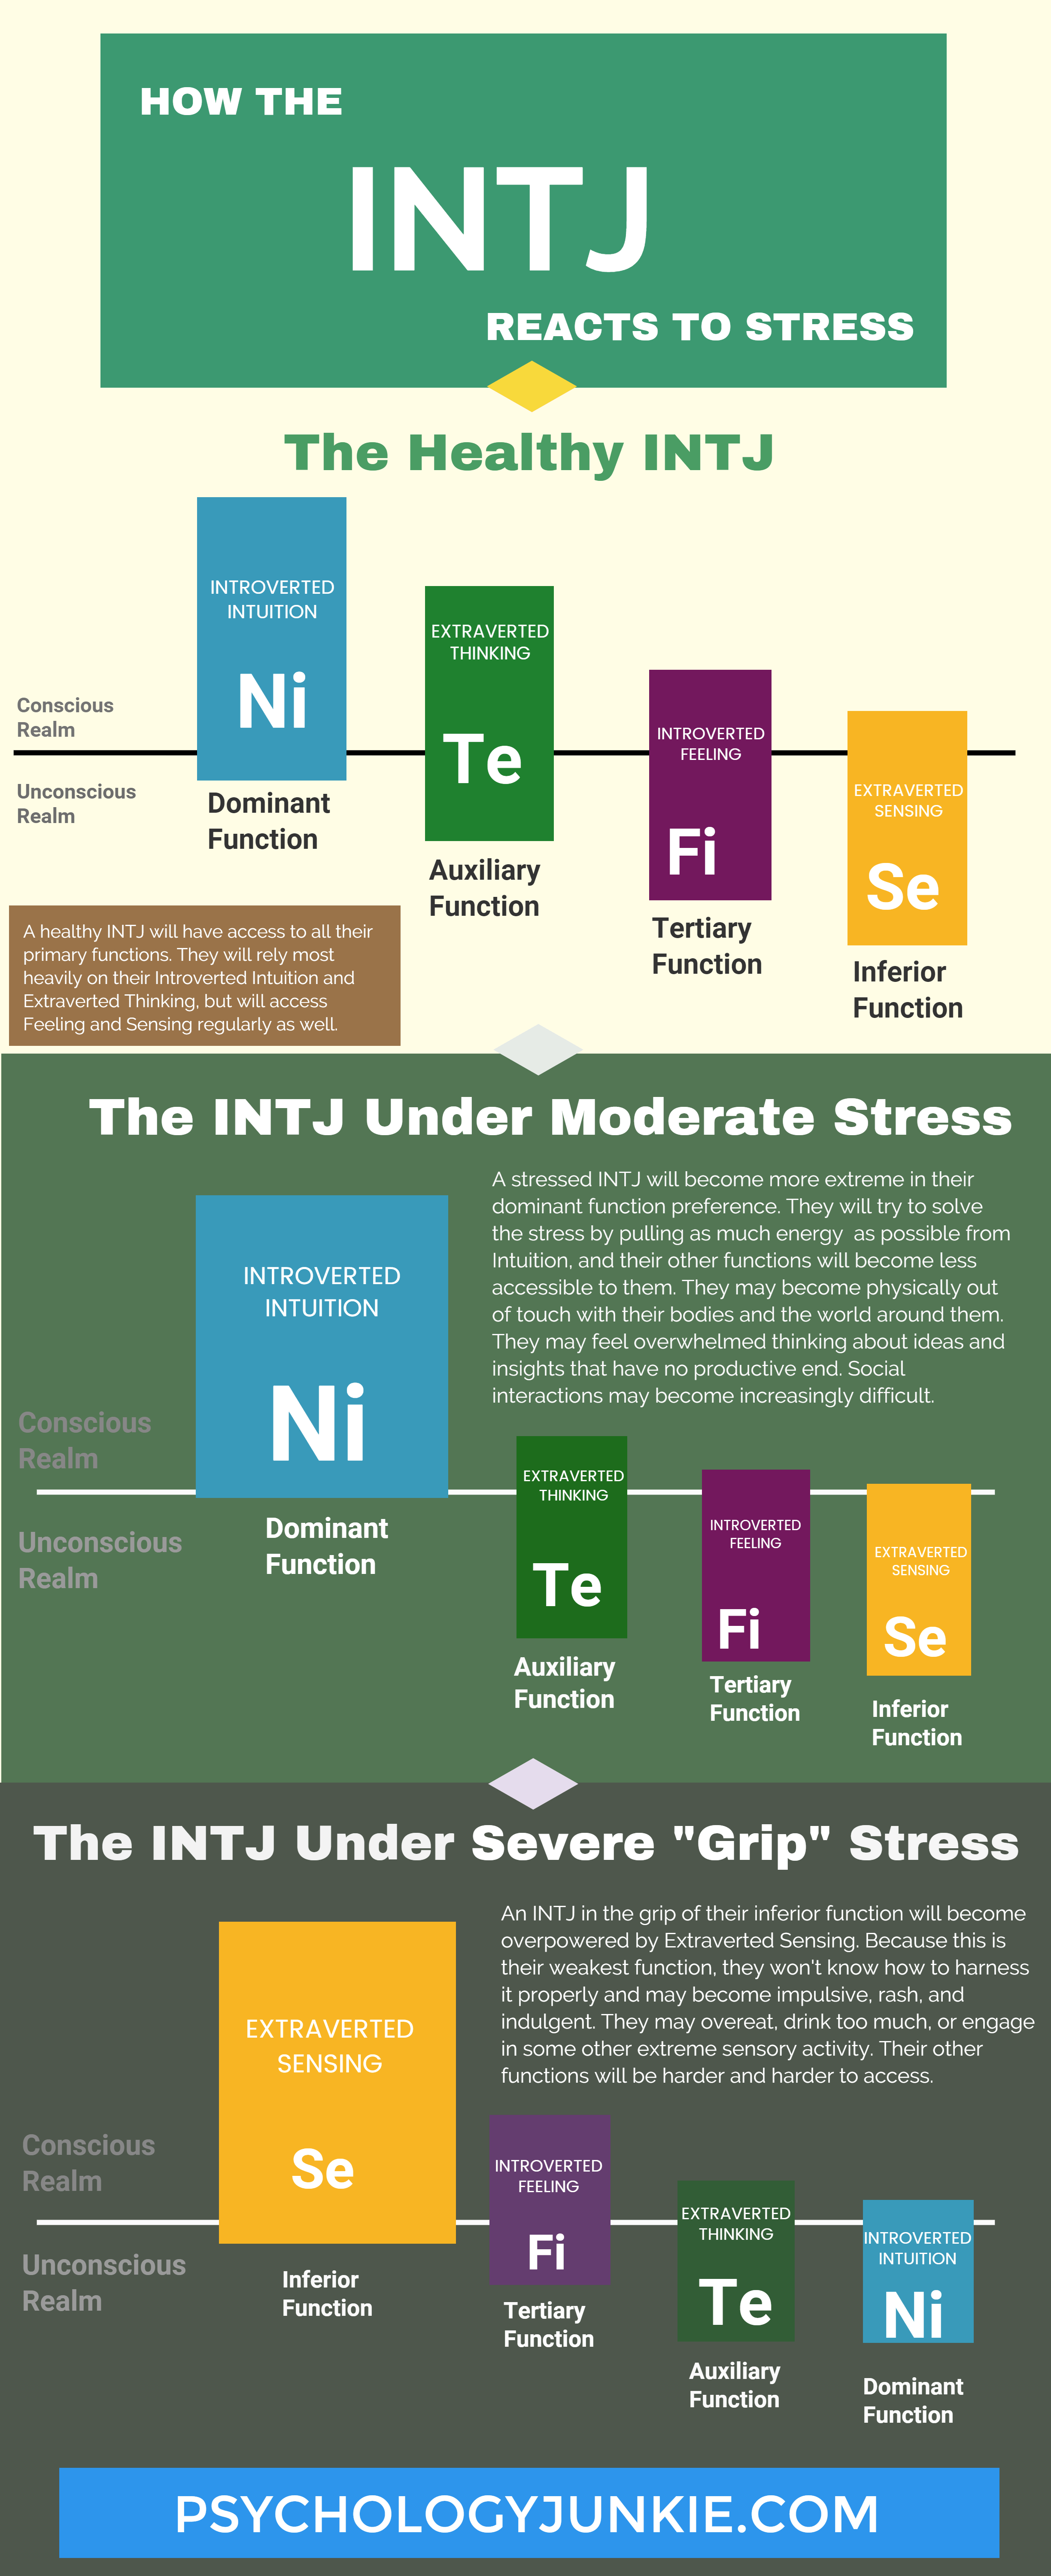 Discover how the #INTJ reacts to stress with this infographic!